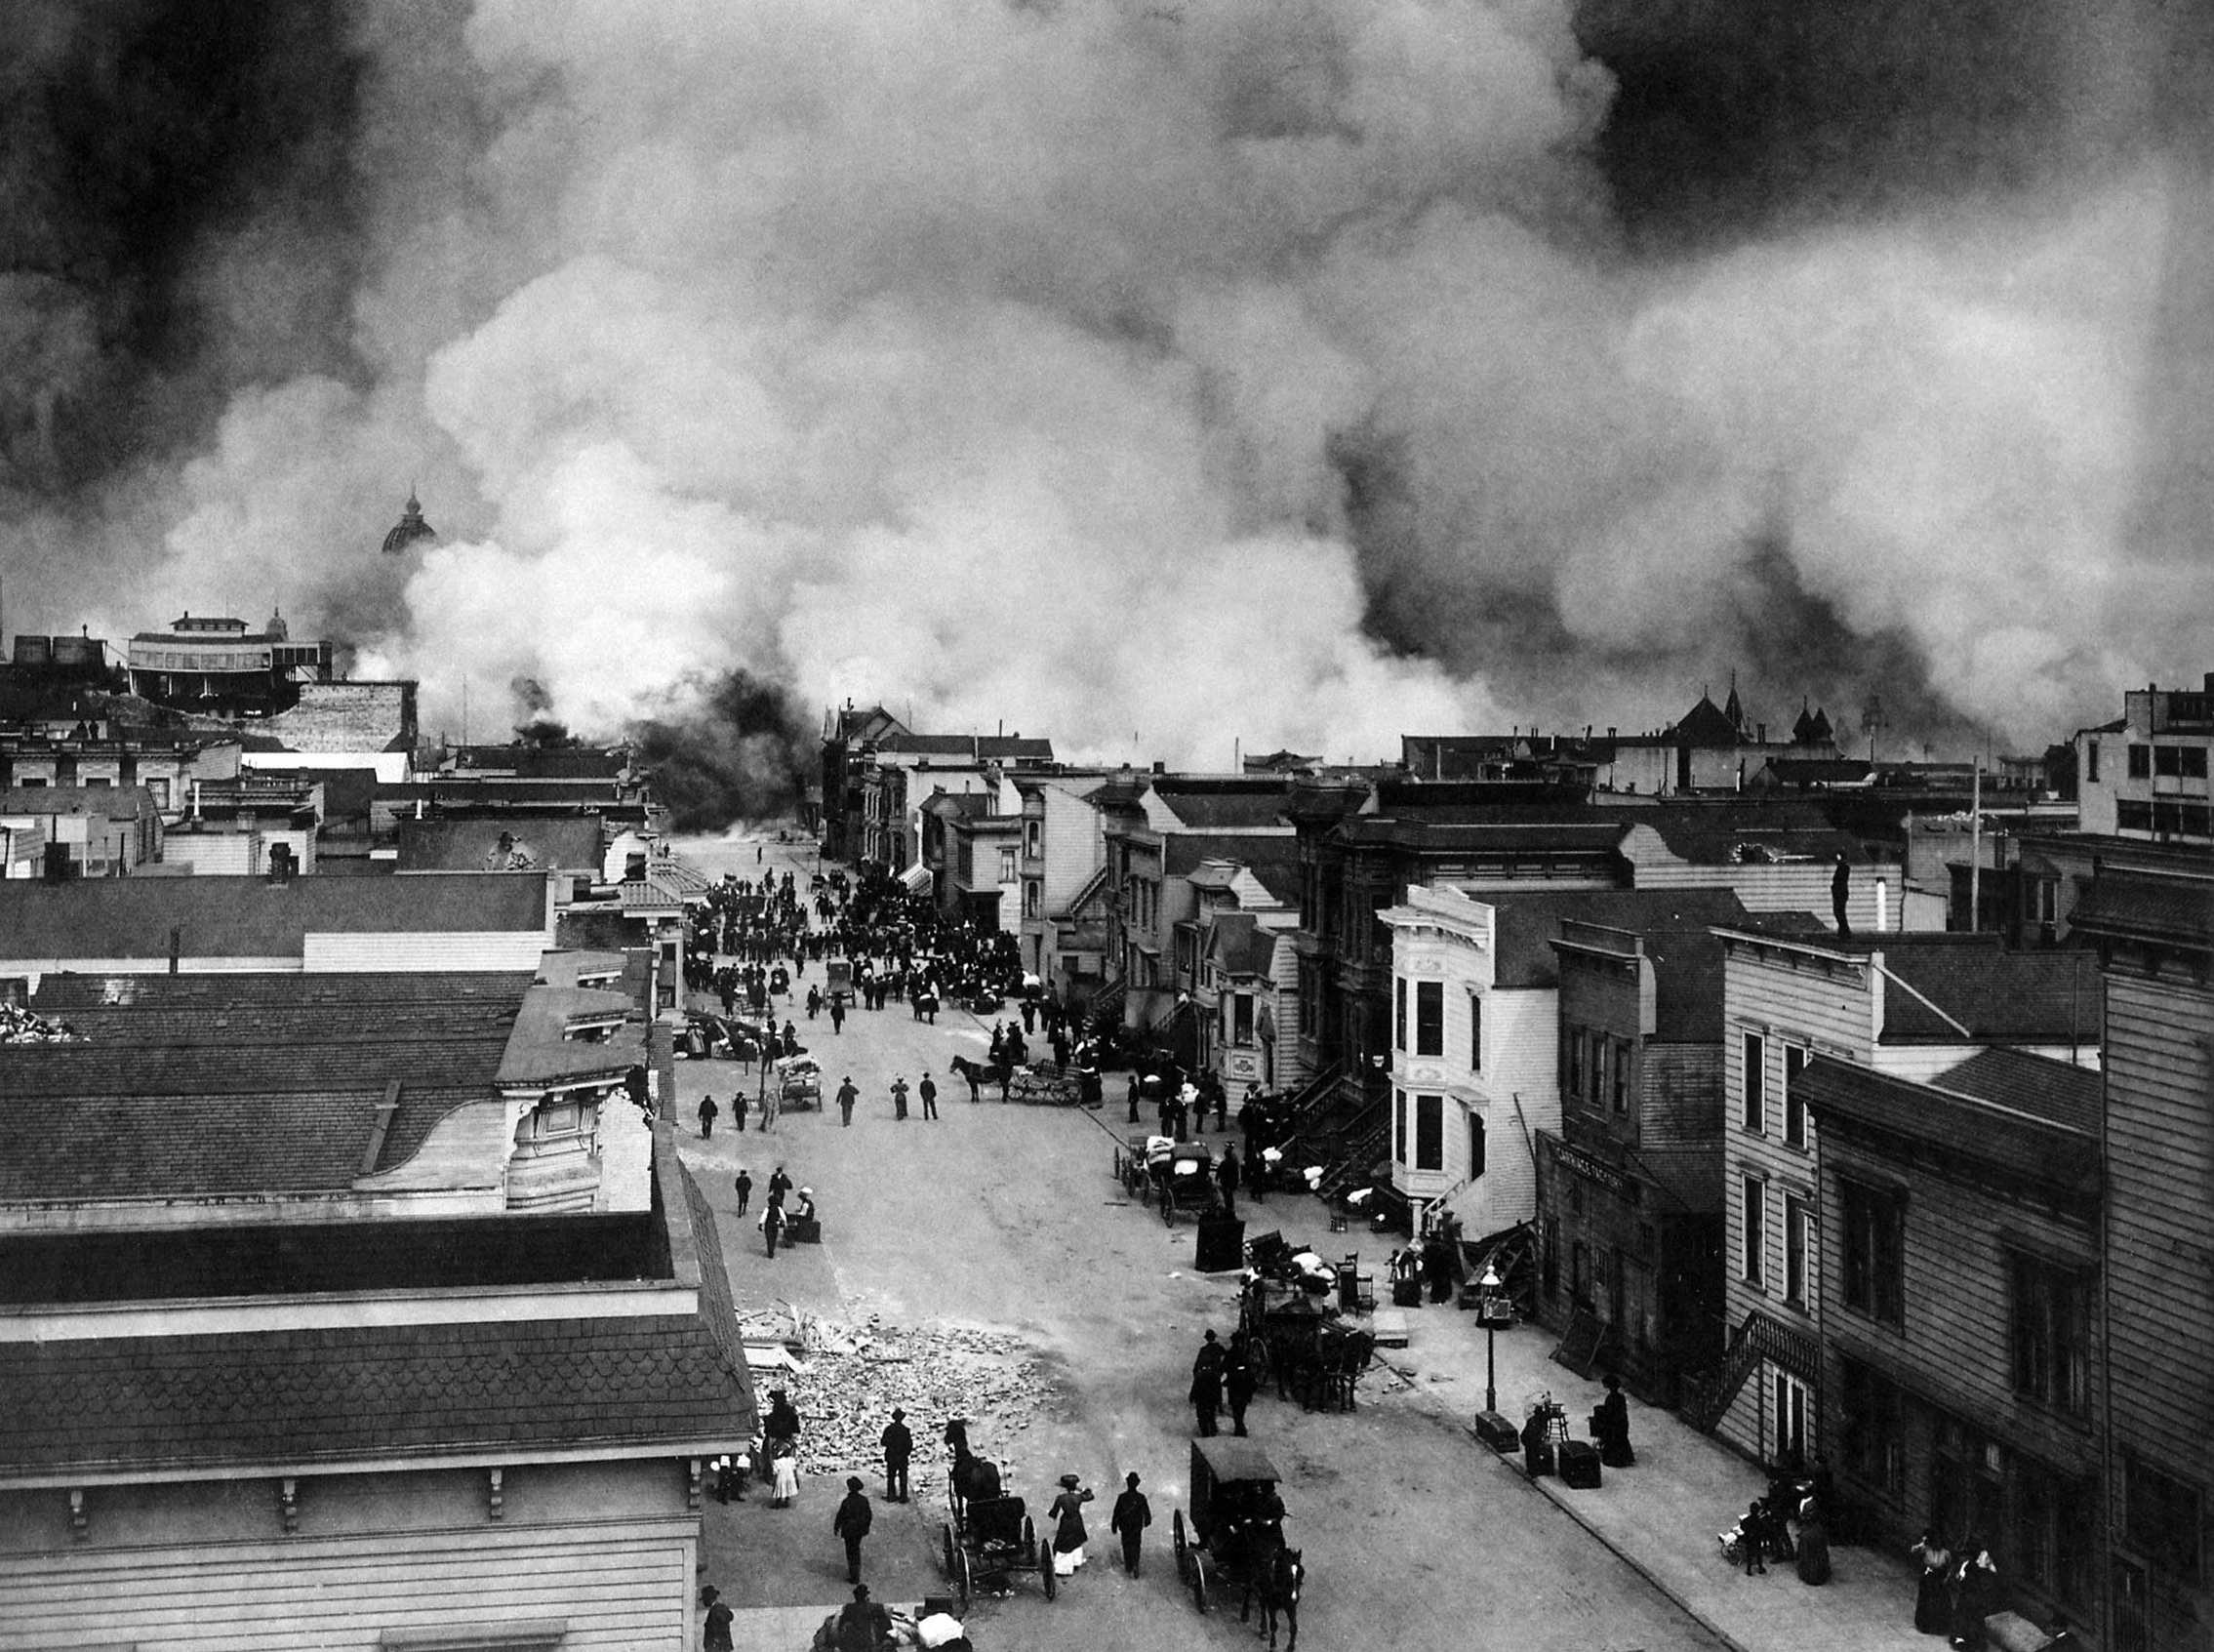 San Francisco Mission District burning in the aftermath of the San Francisco Earthquake of 1906.